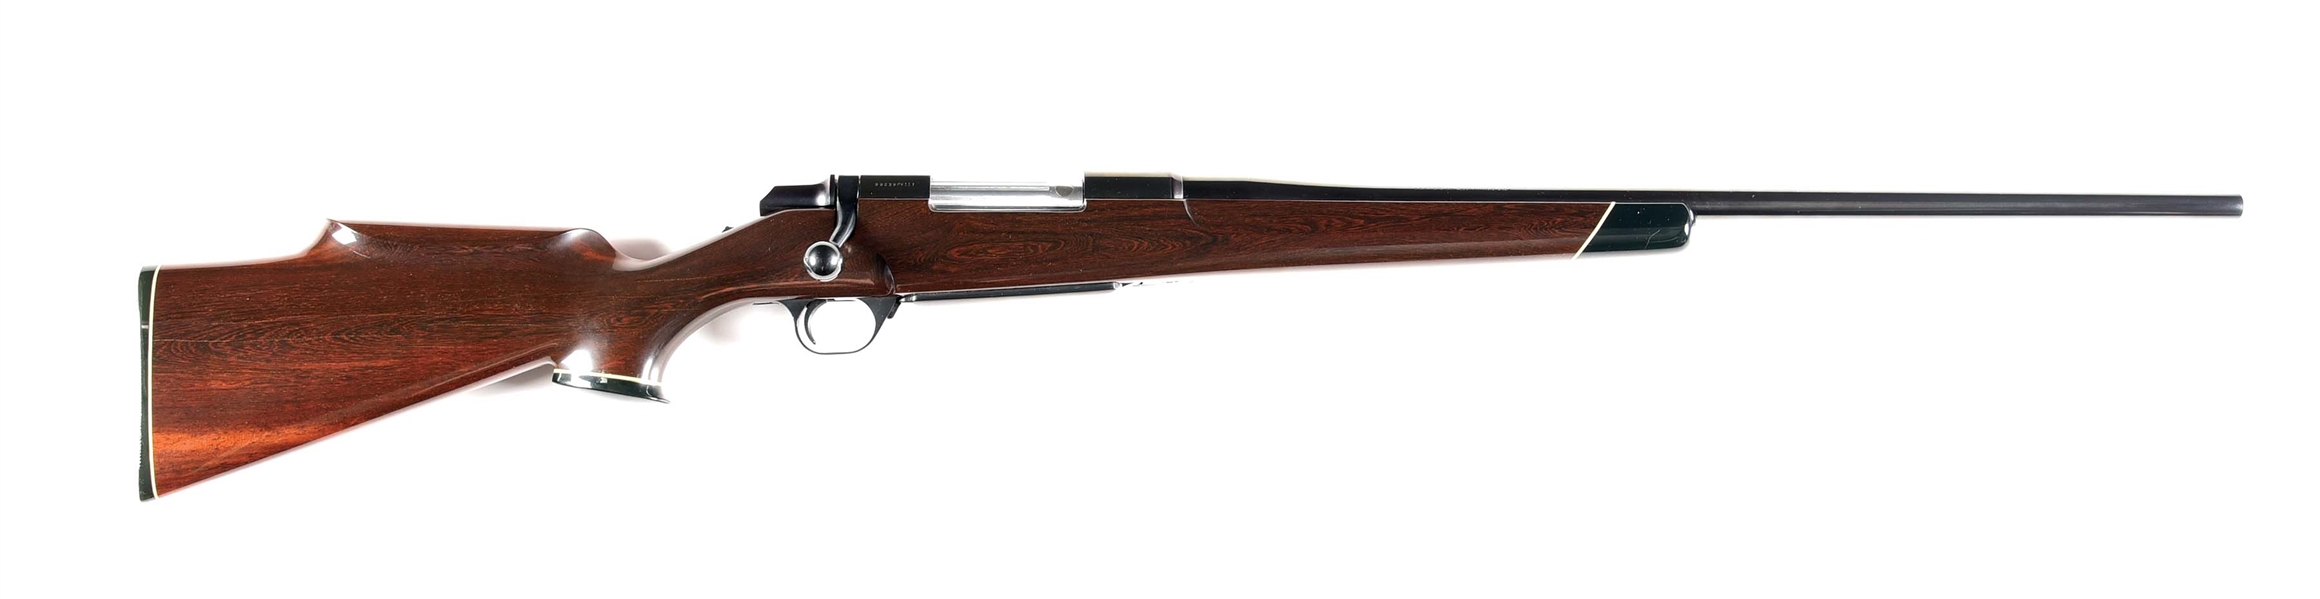 (M) PARTRIDGE WOOD (ANDIRA INERMIS) BROWNING BBR BOLT ACTION RIFLE.